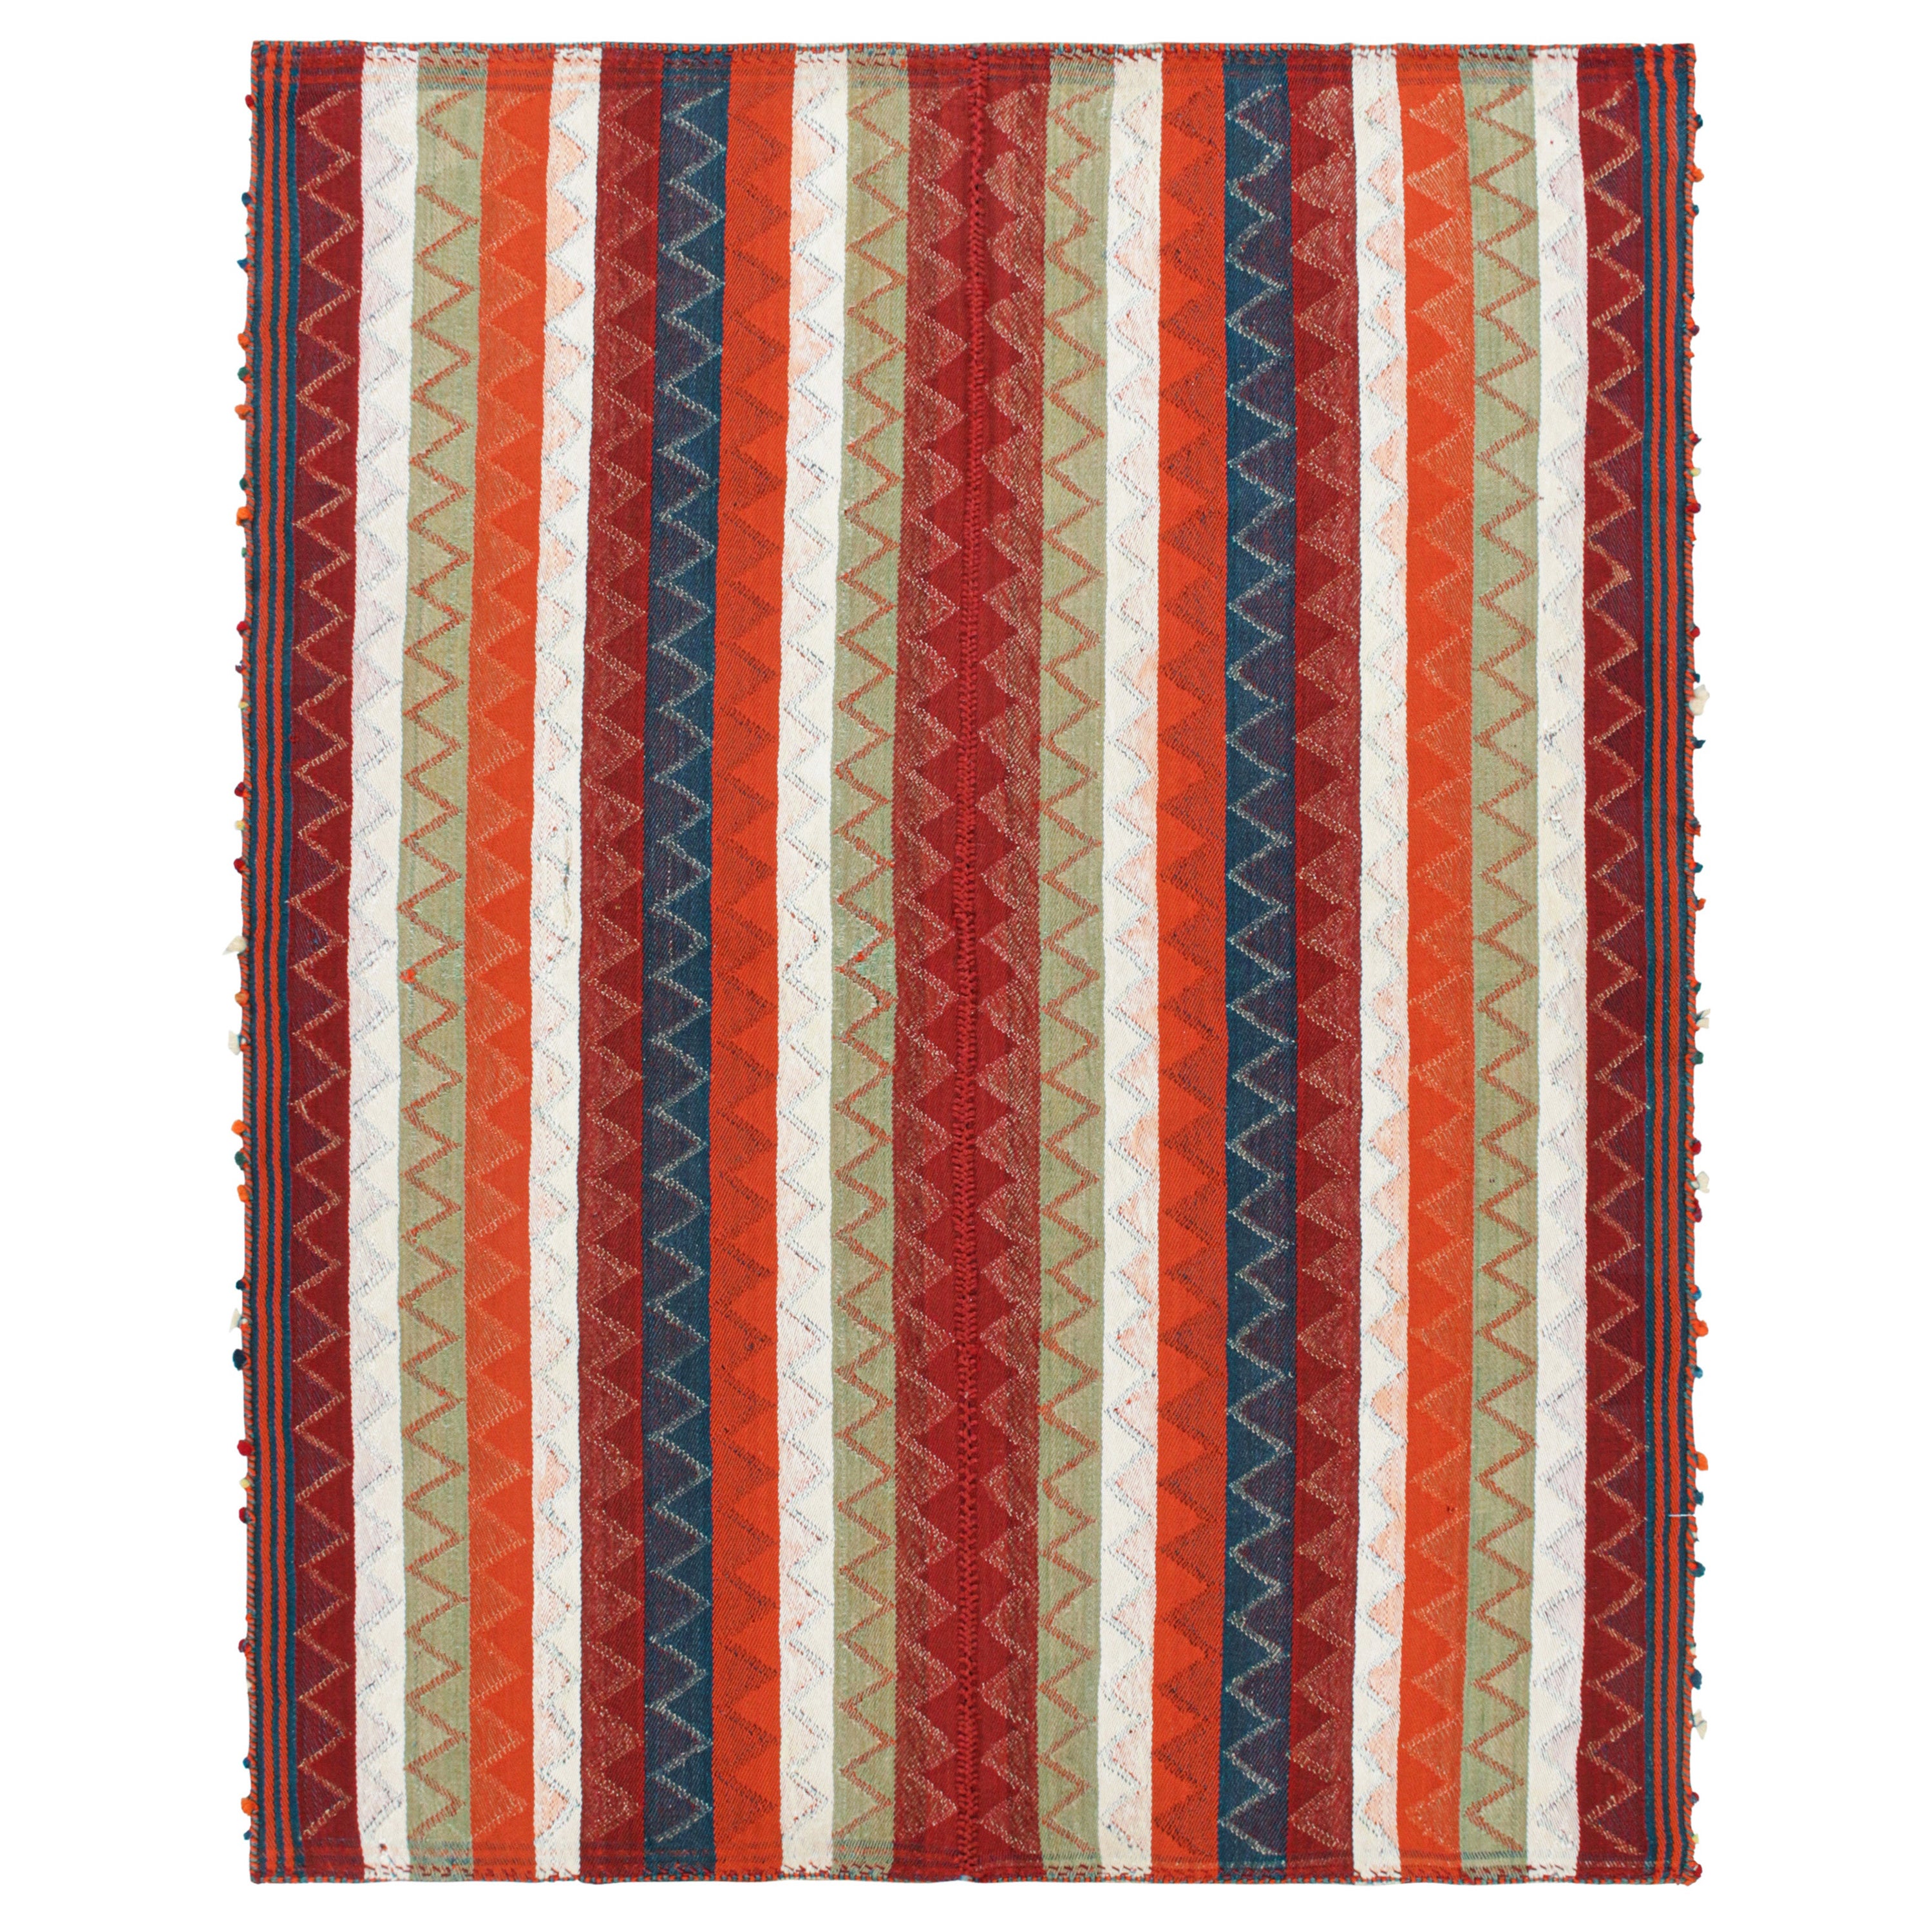 Vintage Persian Kilim in Red with Plaid Multicolor Stripes